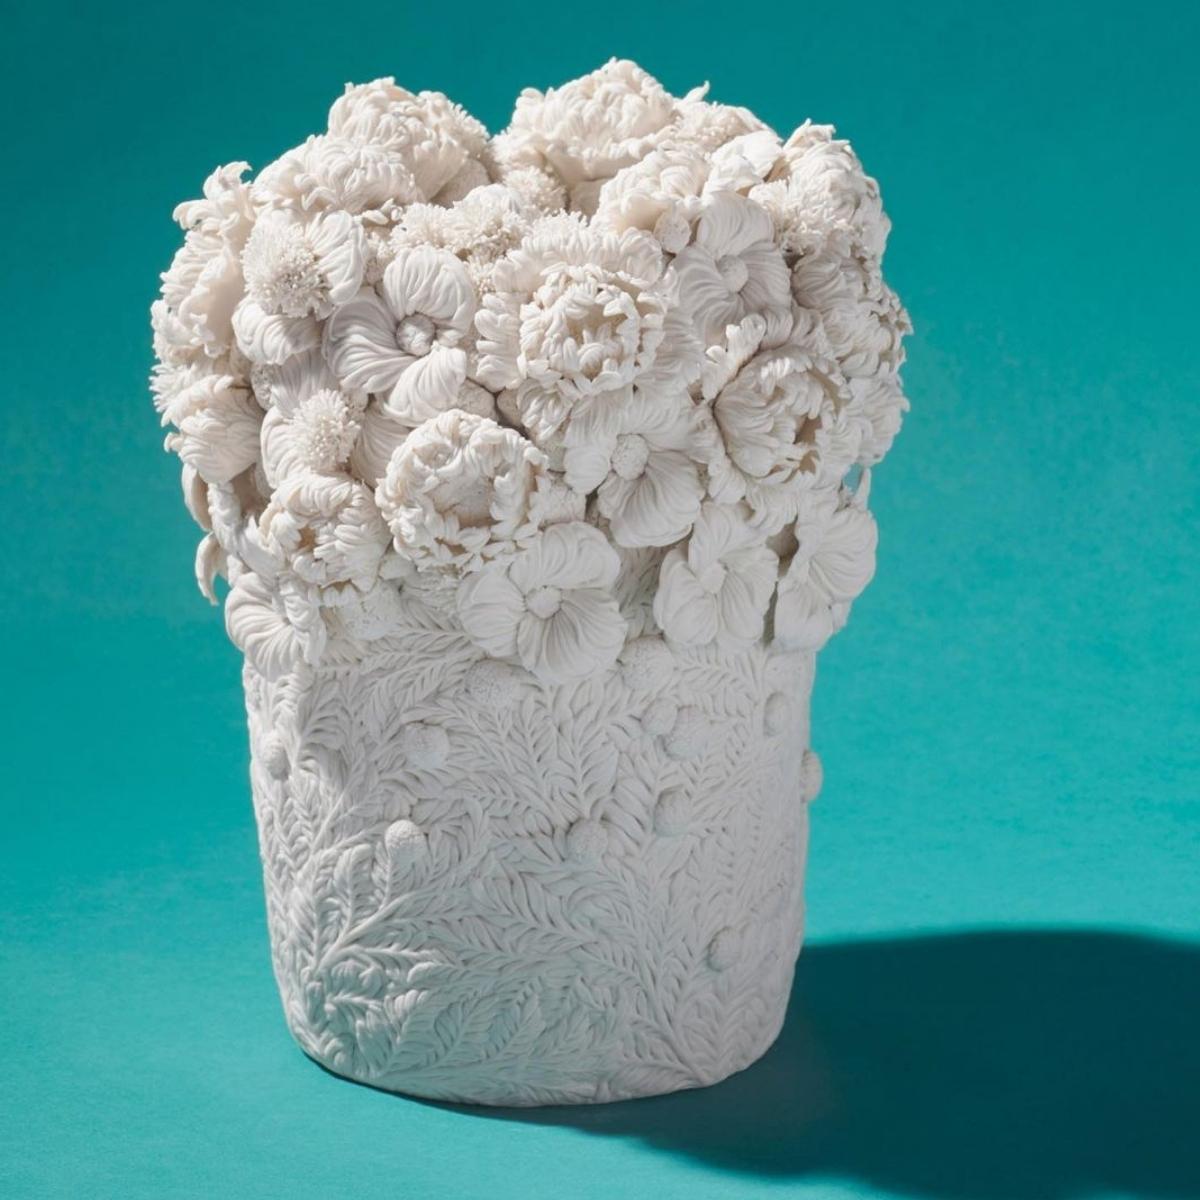 flowers-envelop-the-detailed-porcelain-vessels-from-hitomi-hosono-featured